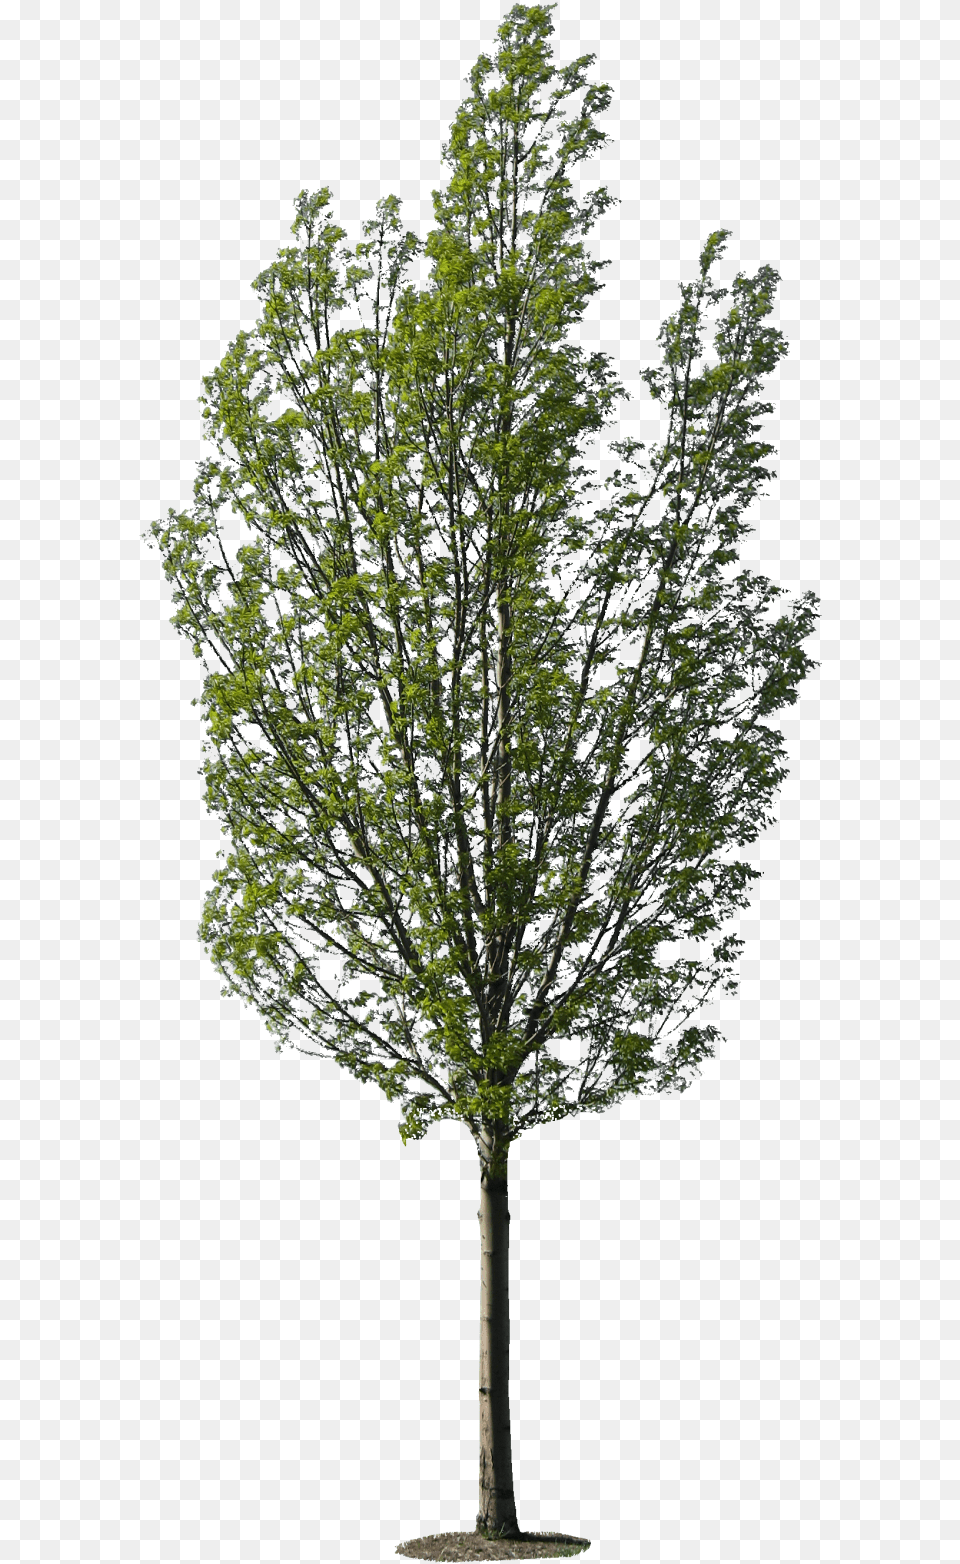 File Size Tree Textures, Maple, Oak, Plant, Sycamore Png